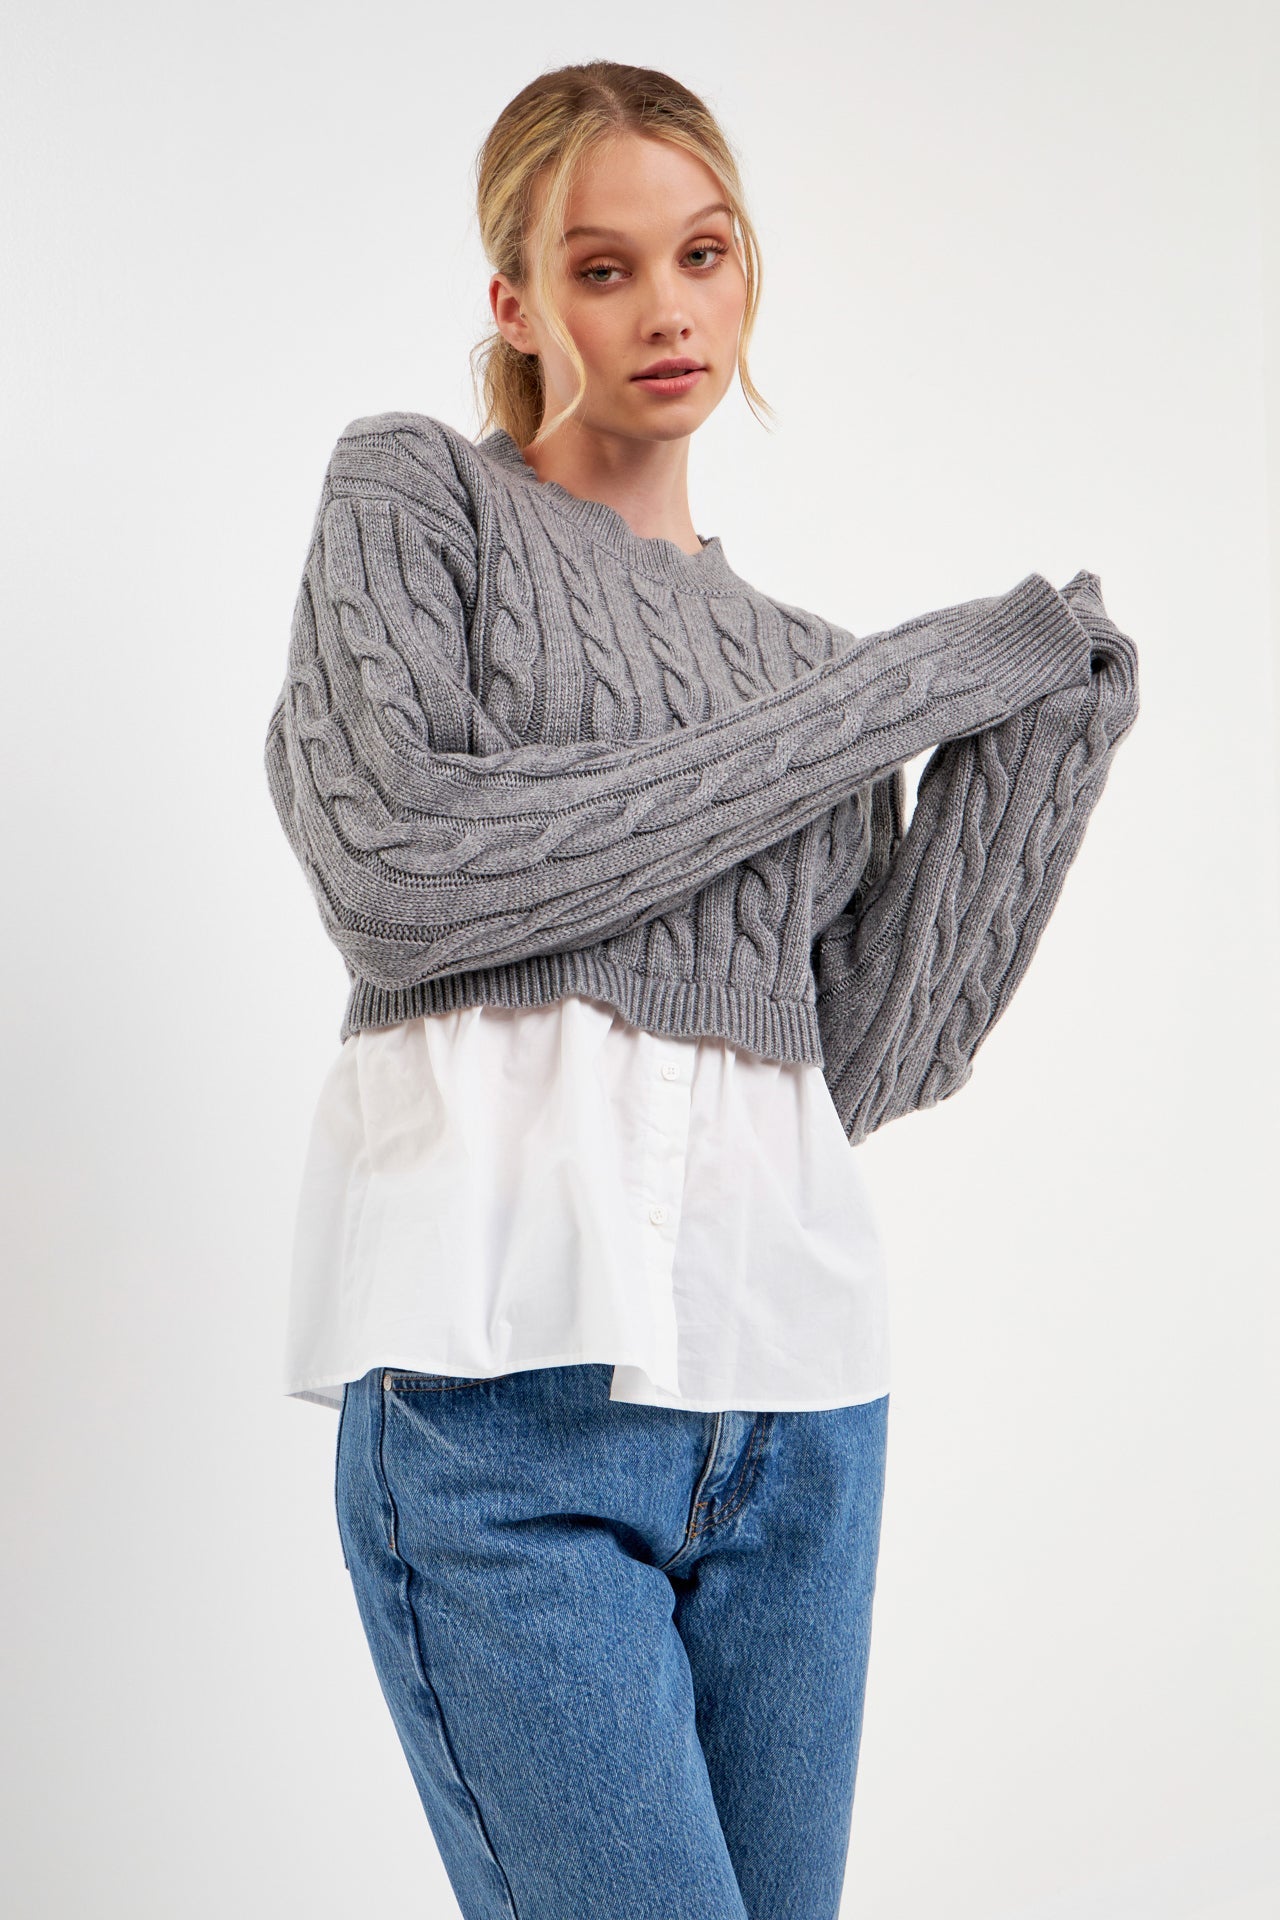 ENGLISH FACTORY - Mixed Media Sweater - SWEATERS & KNITS available at Objectrare